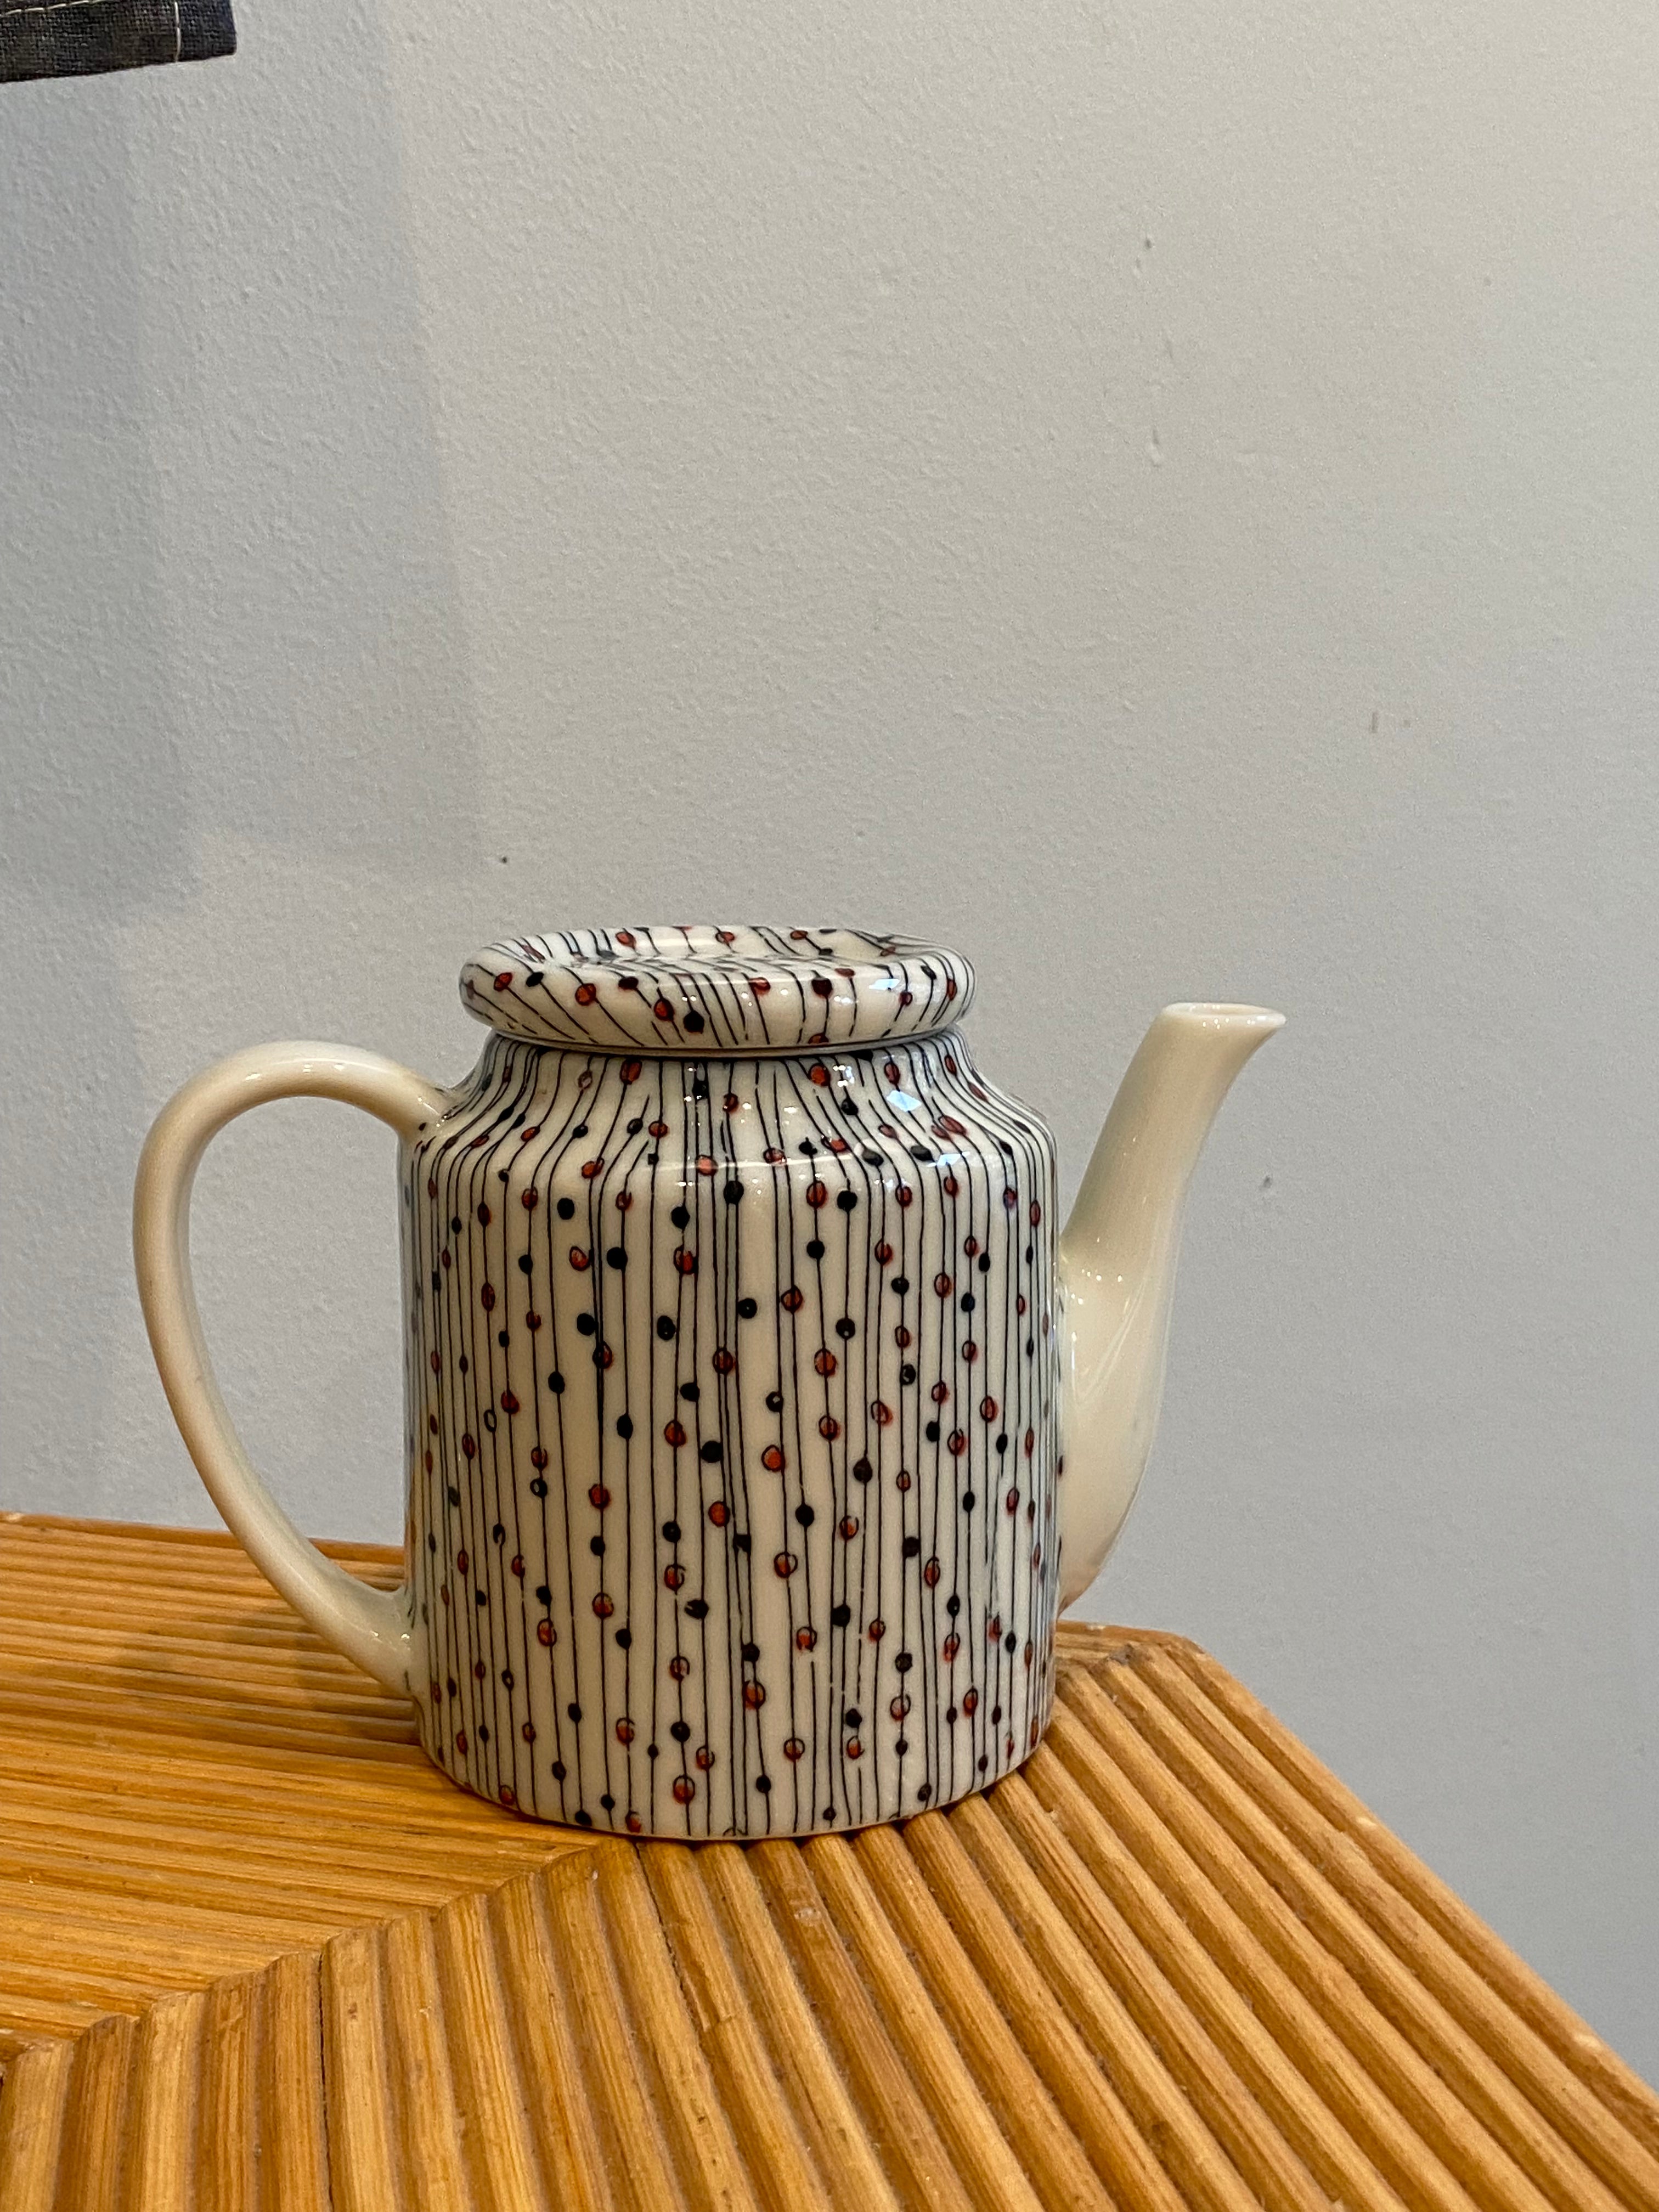 Small teapot with lines and dots